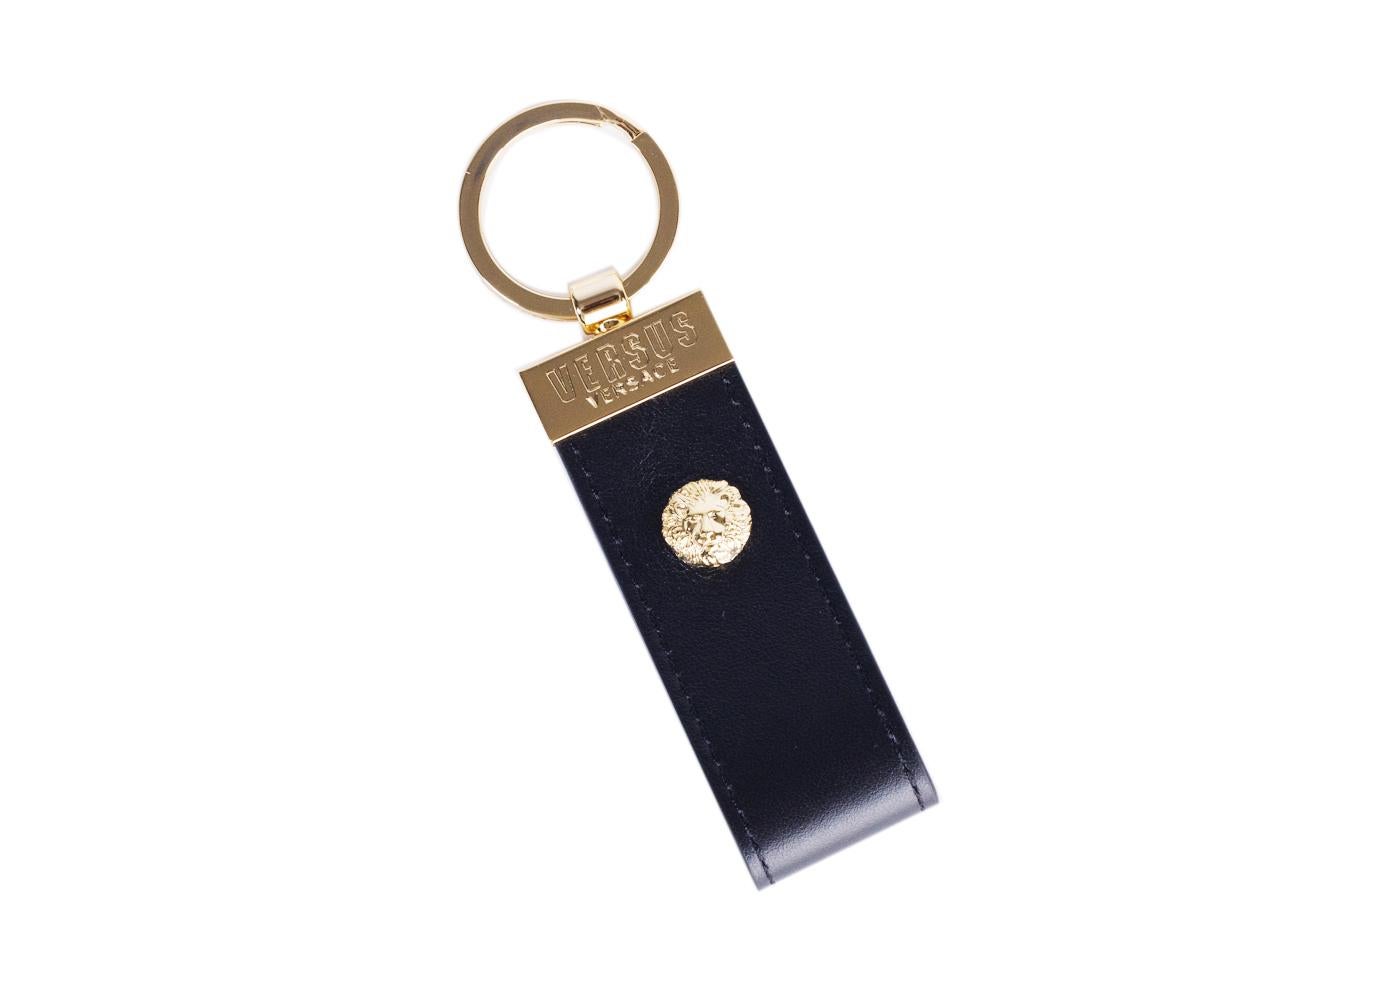 Lock your priorities down in confidence with your Versus Versace Key Ring. This smooth unit features a sleek leather band, miniature gold toned lion head, and clean engraved logo plating. You can hook your essentials onto this for the win and